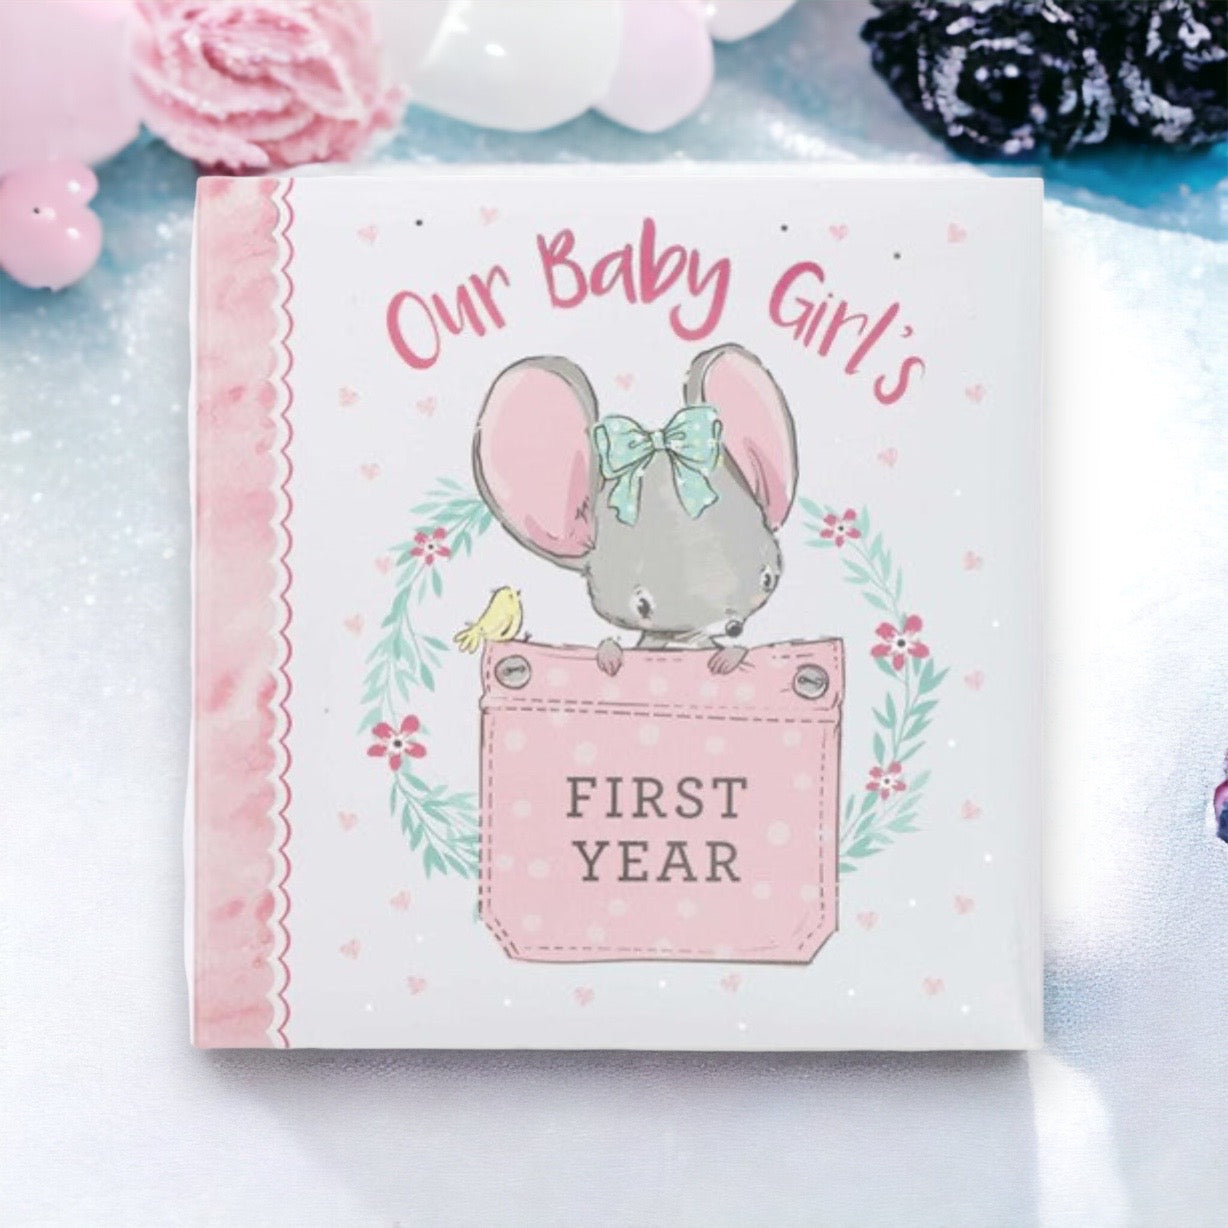 Our Baby Girl 1st Year Memory Book